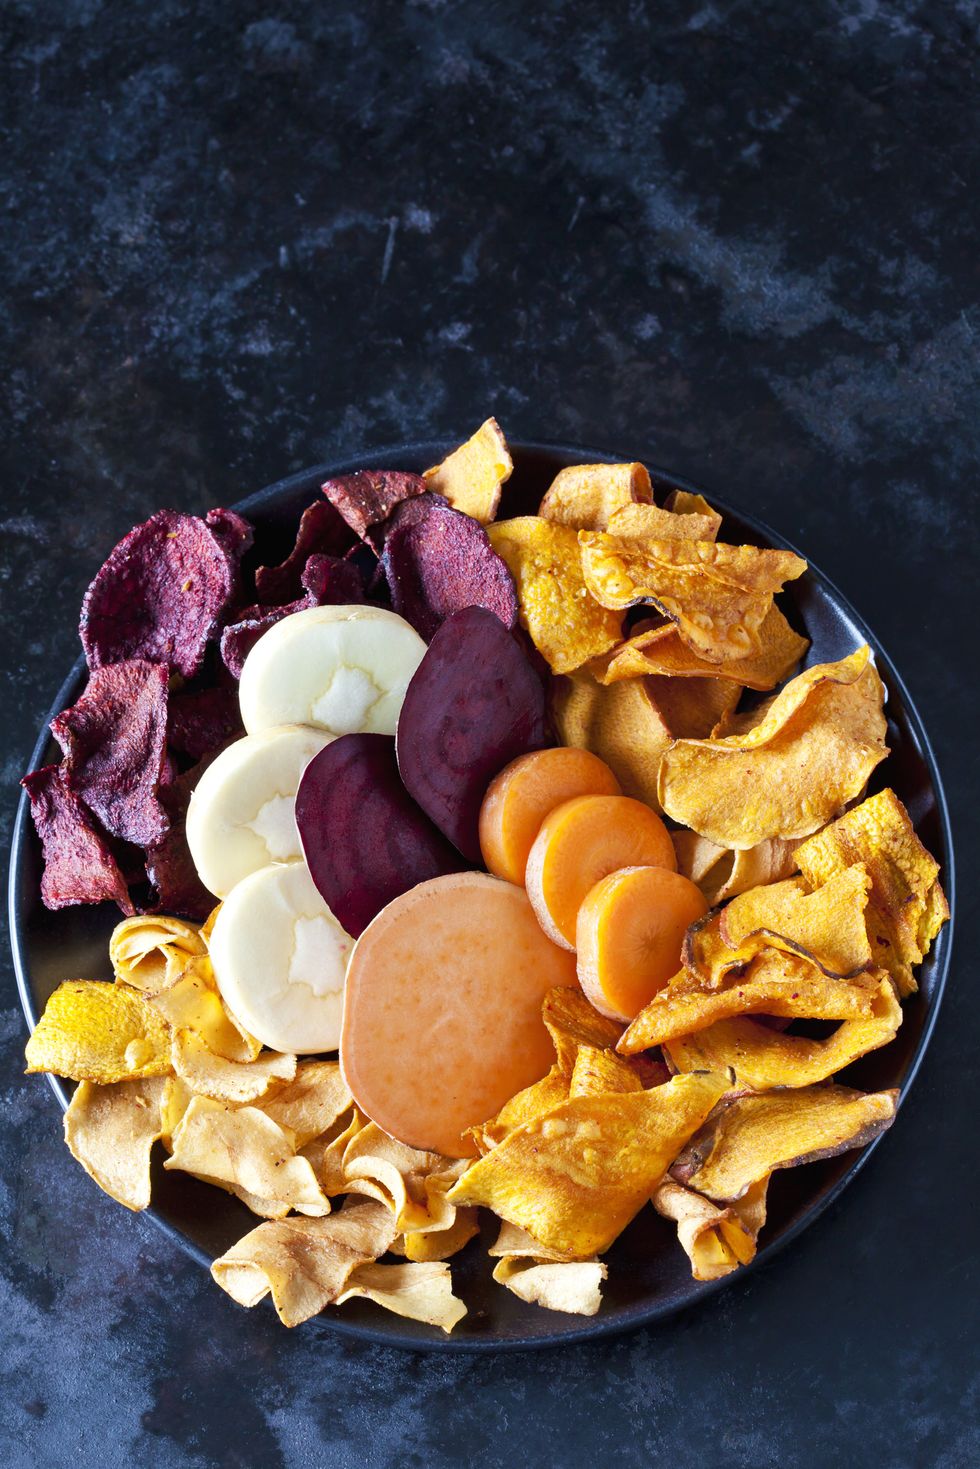 Sliced root vegetables and vegetable chips in bowl